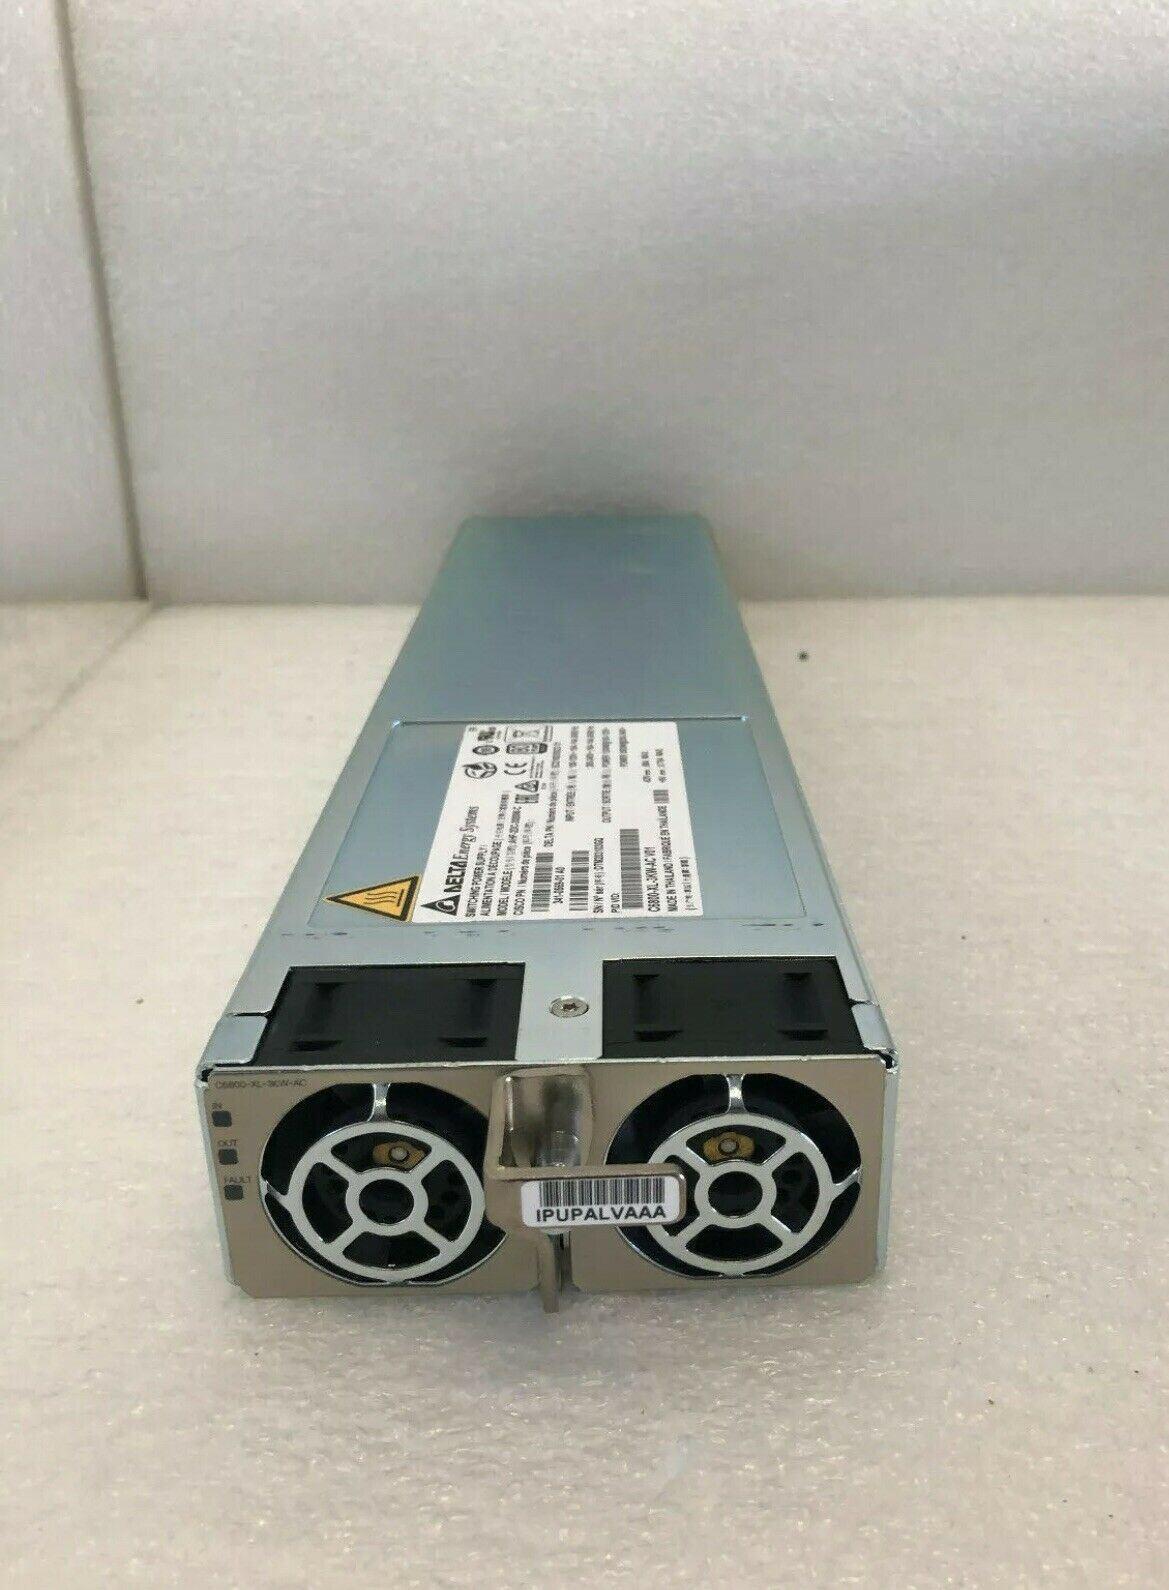 AHF 2DC 3000W C 341 0569 01 c6800 xl 3kw ac cisco c6800 xl 3kw ac 3000 watt power supply for catalyst 6807 xl